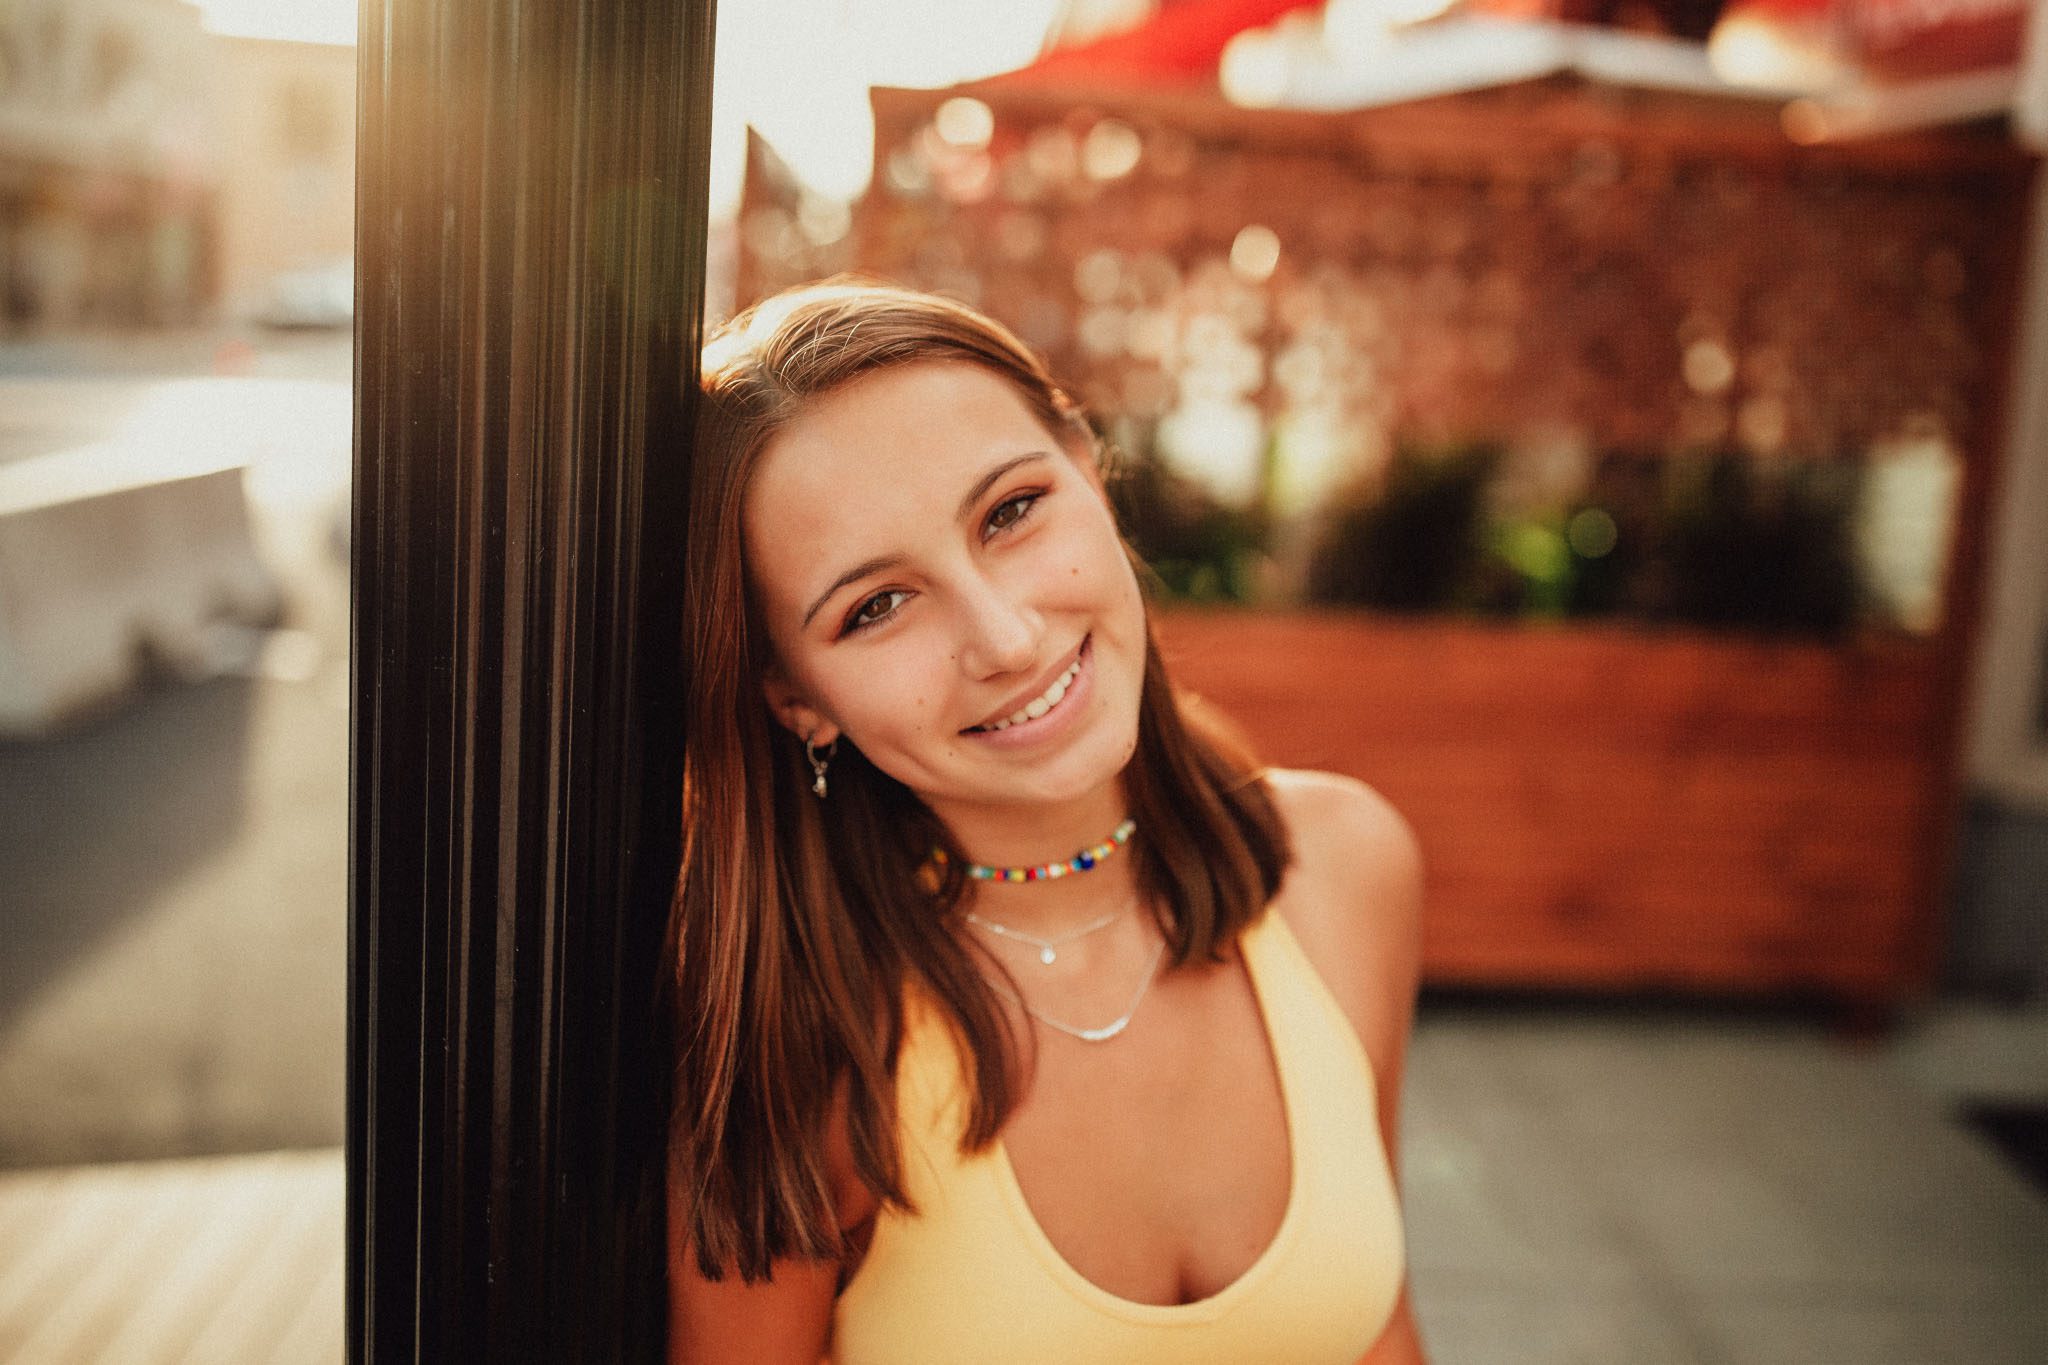 Summer senior portrait of a young woman leaning against a lamp post in a city in Massachusetts photographed by Sean Wytrwal of J&S Photography